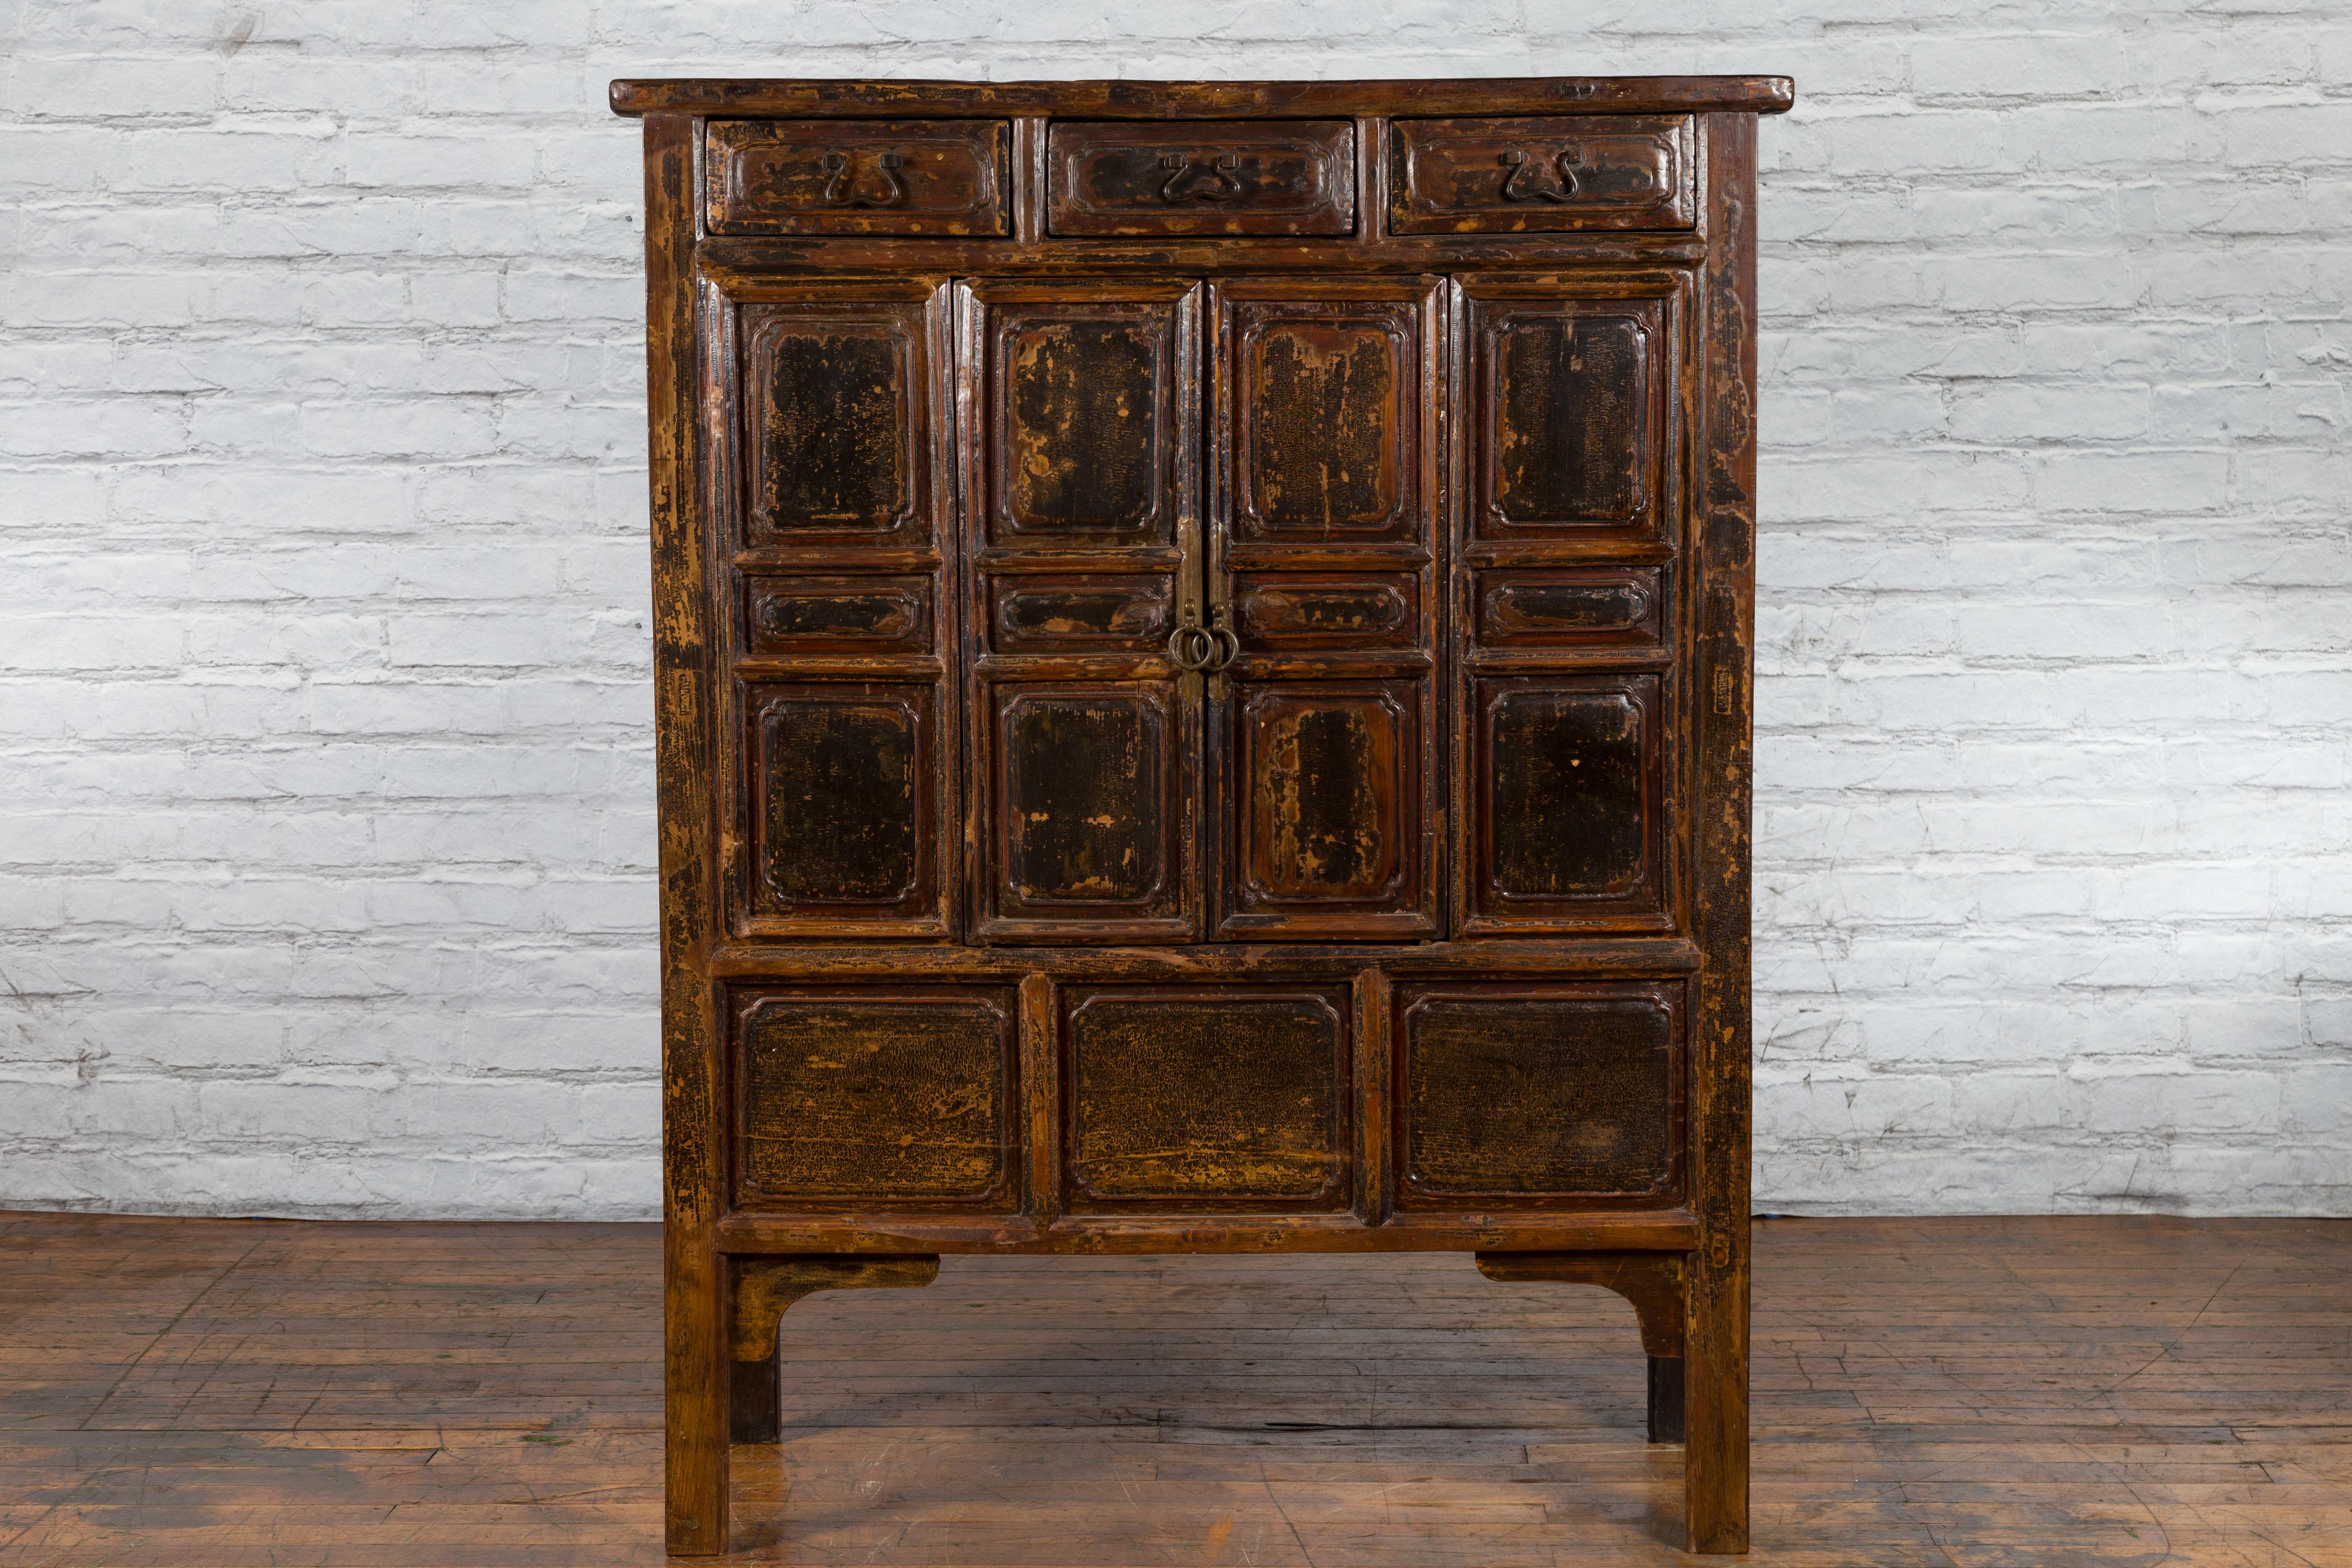 A dark brown lacquered Qing Dynasty Chinese cabinet from the early 19th century with three drawers, double doors and nicely distressed patina. Created in China during the early years of the 19th century, this hand carved cabinet features three